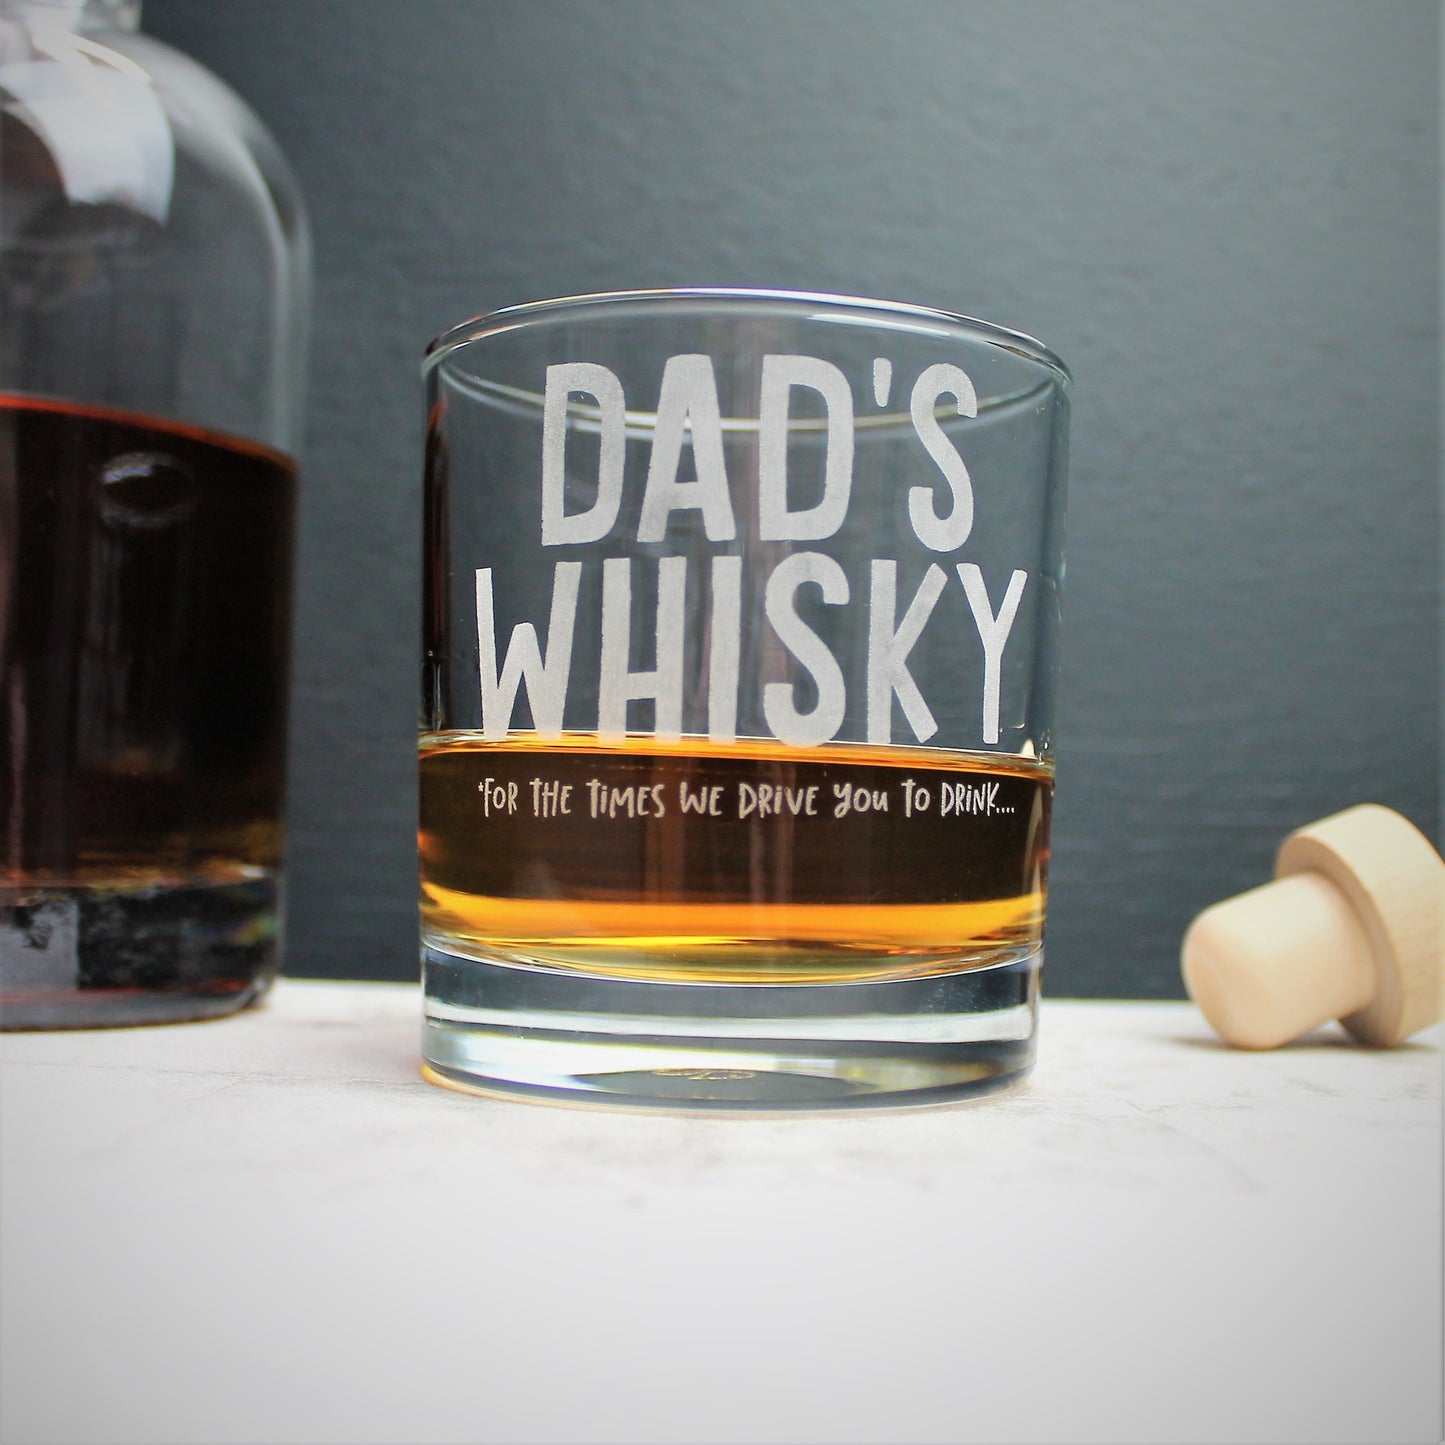 engraved glass tumbler engraved with the text dad's whisky - perfect for fathers day 